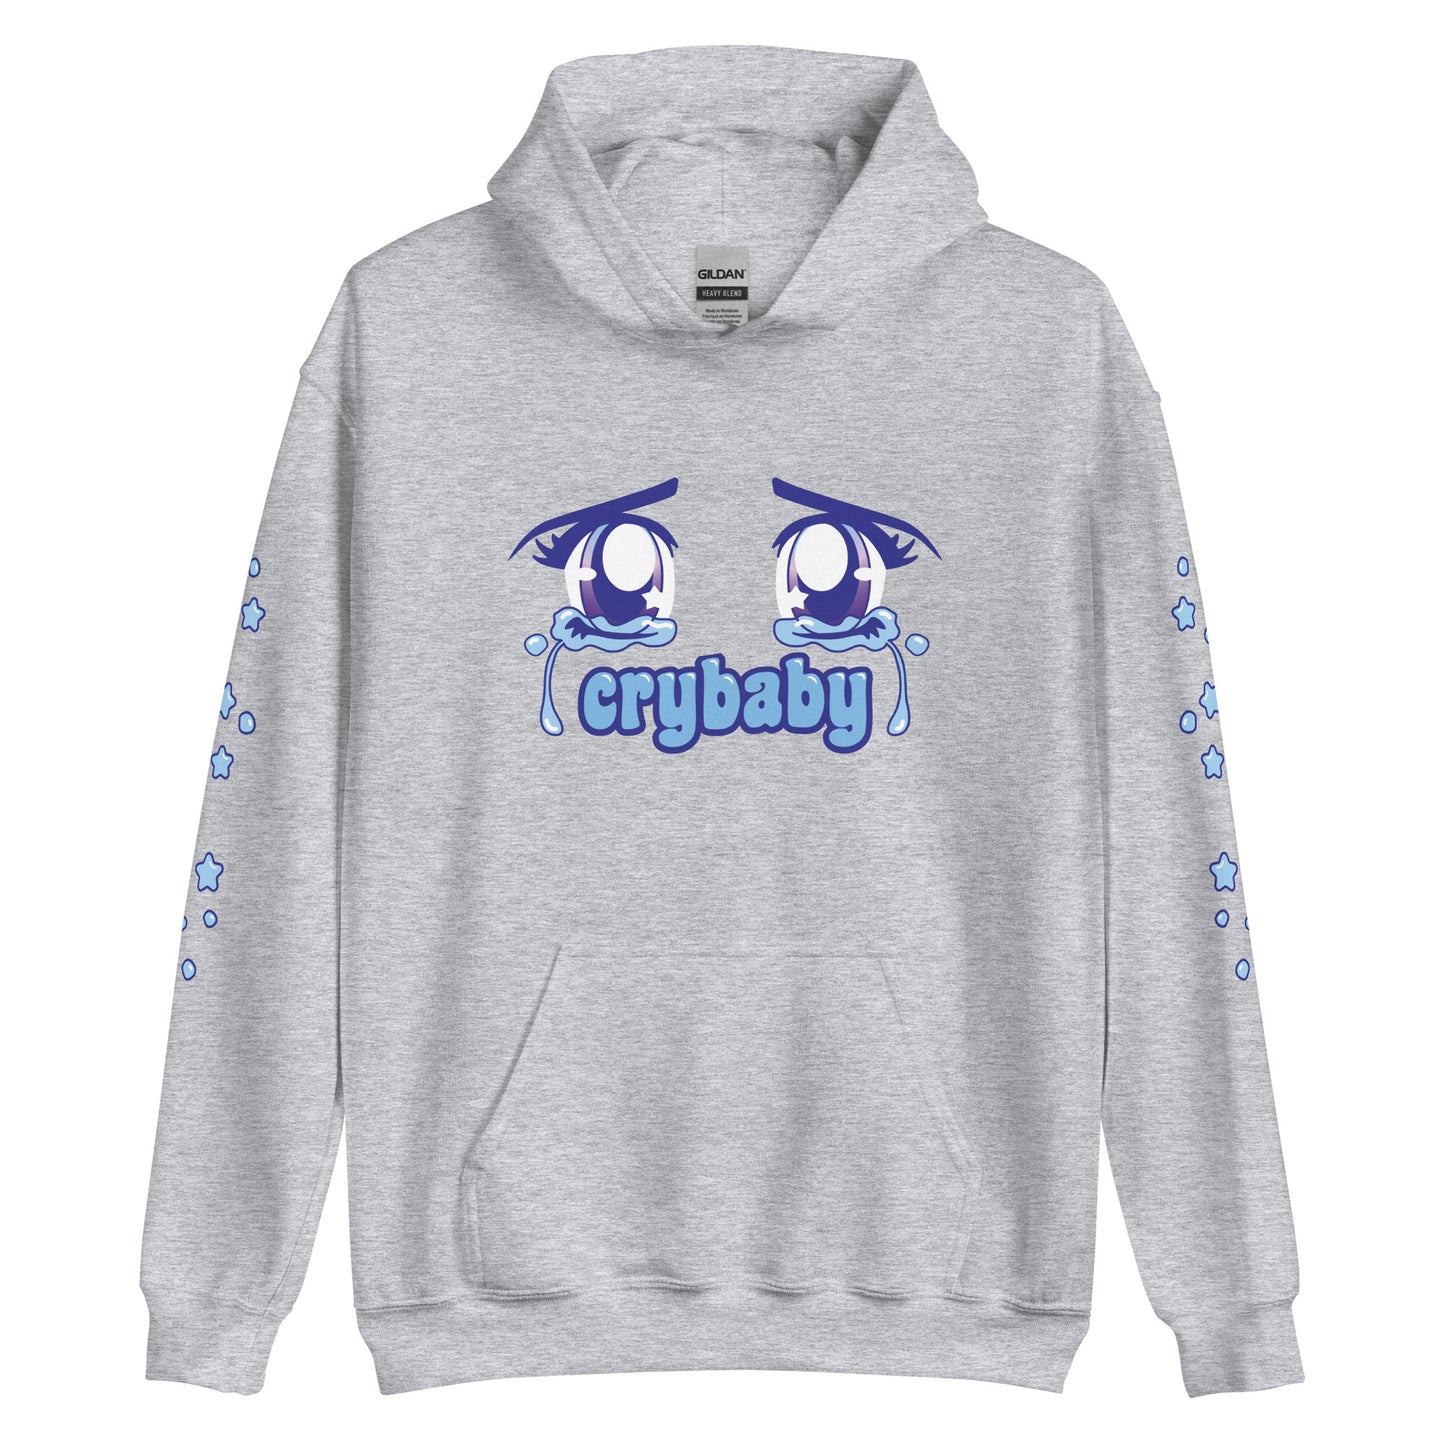 A light grey hooded sweatshirt featuring an image of crying anime-style eyes. Text underneath the eyes reads "crybaby". Small teardrops and stars decorate each sleeve.